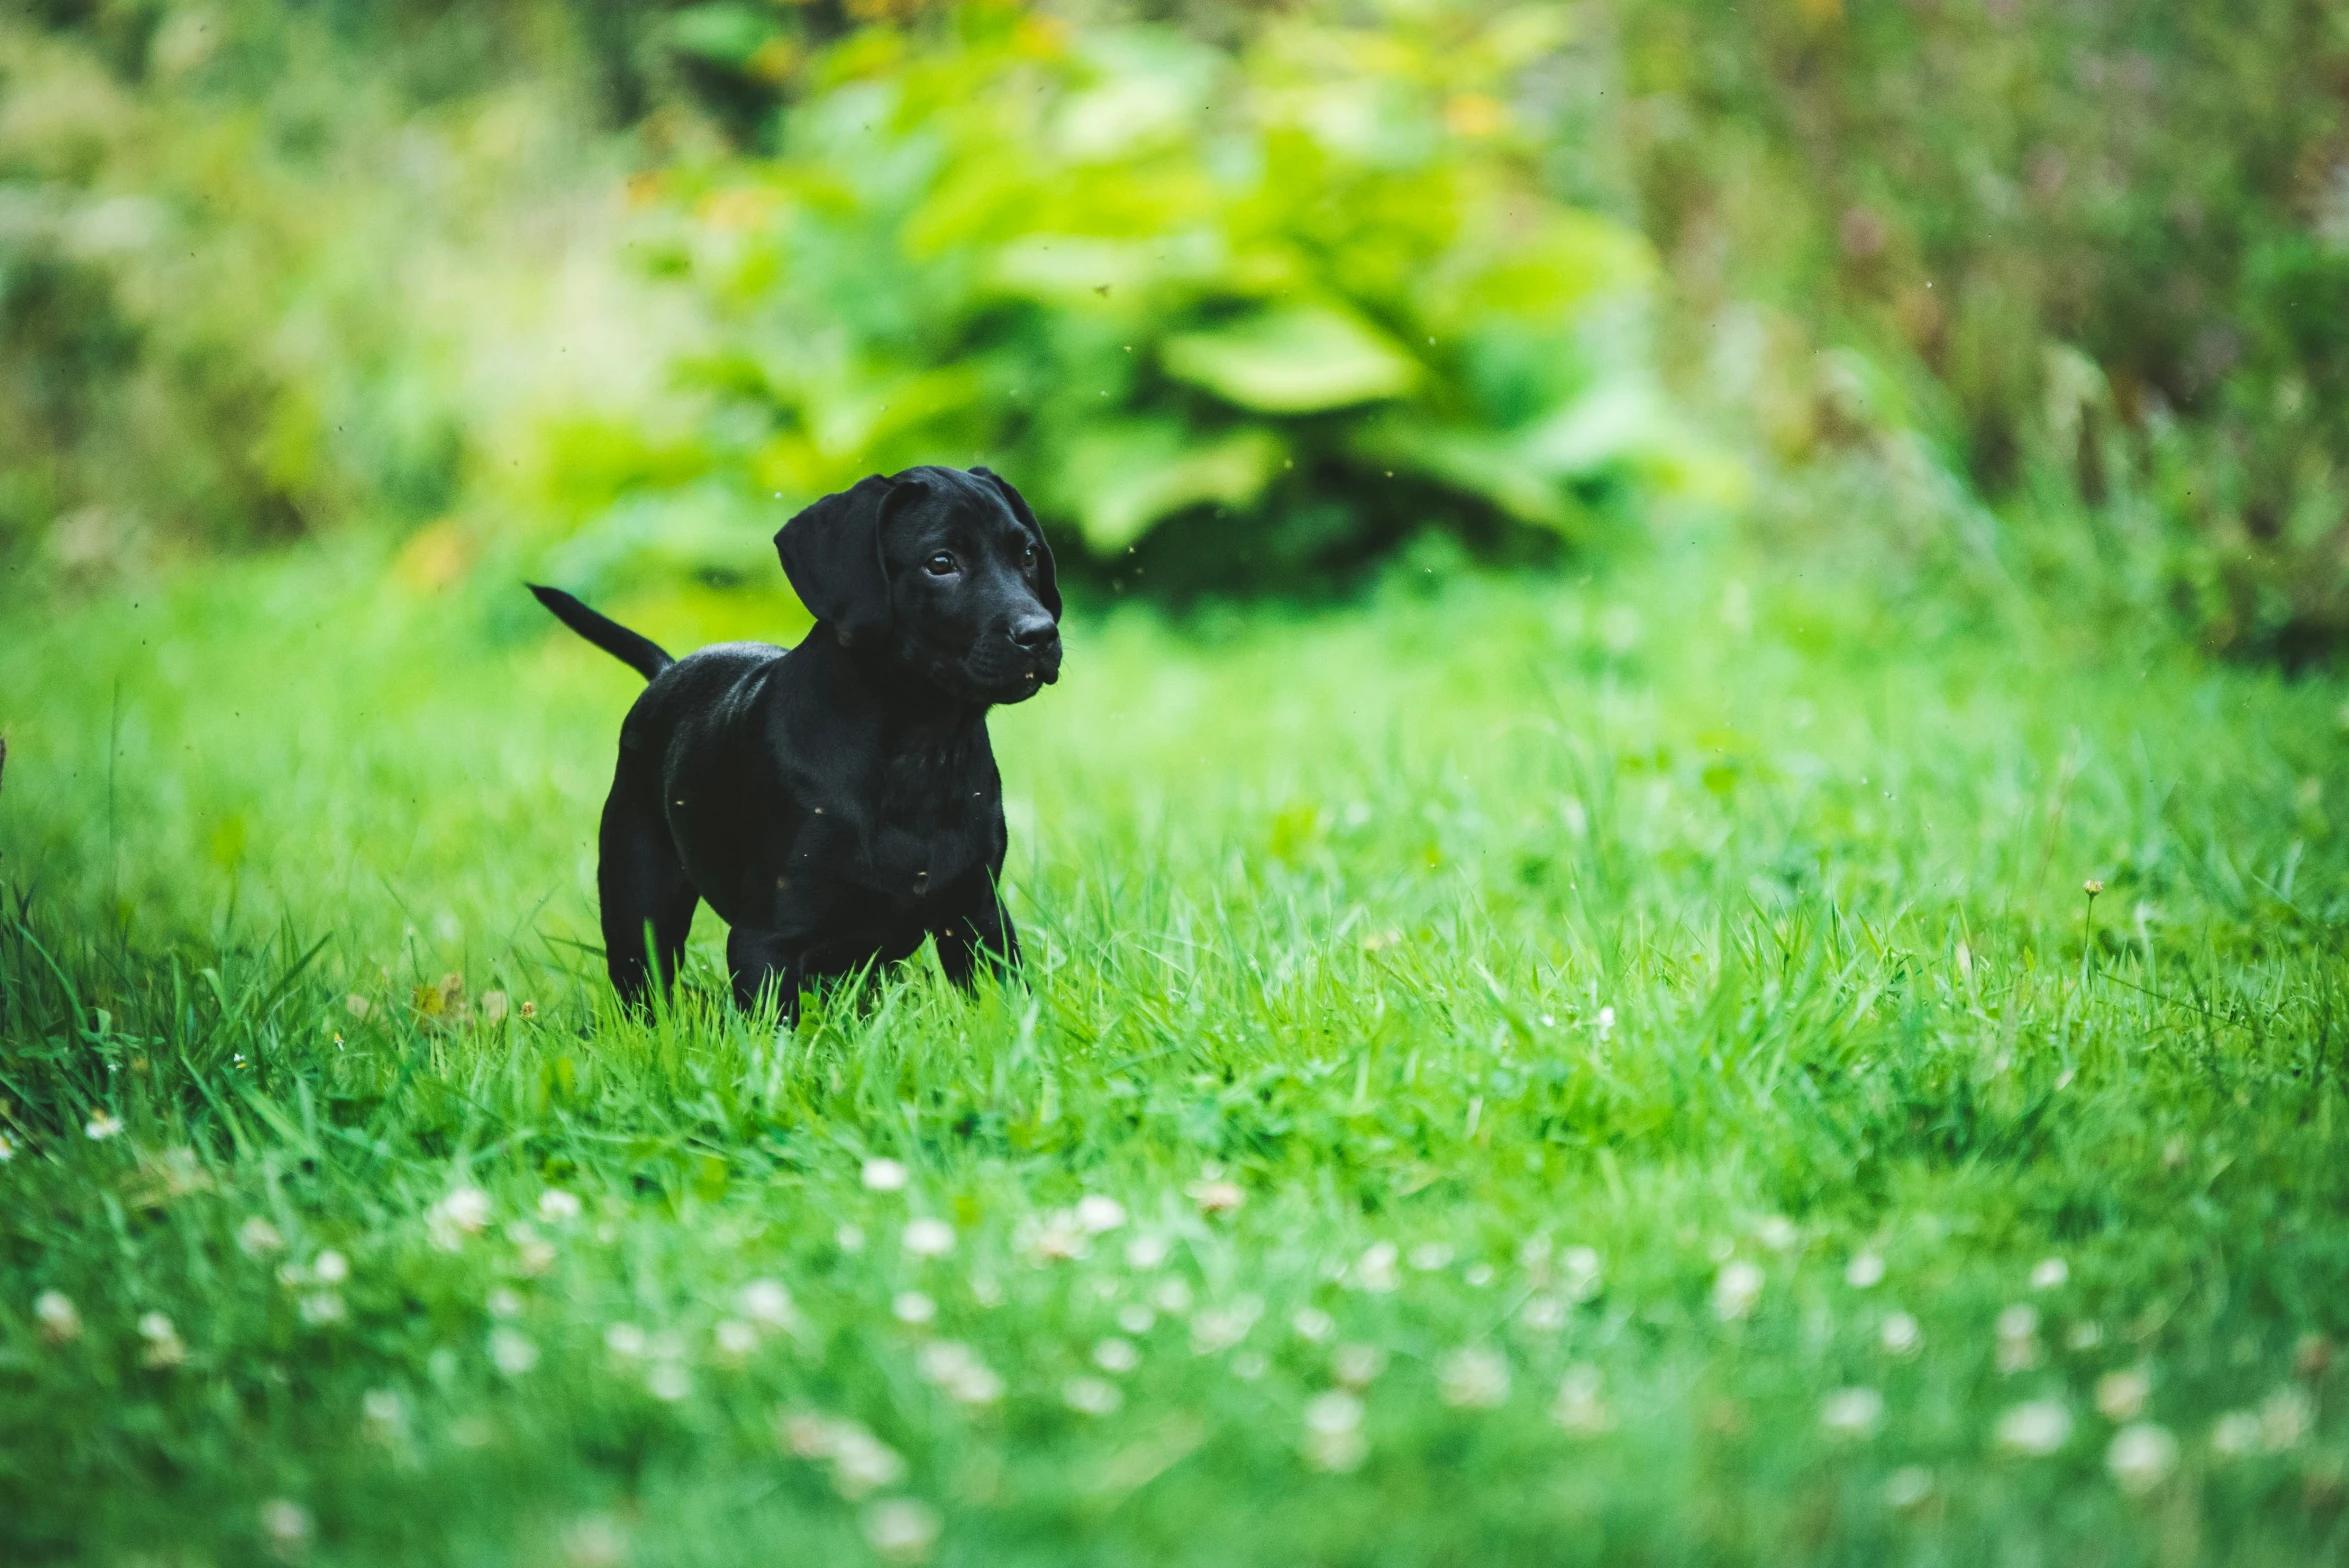 a puppy standing alone in the grass with a frisbee